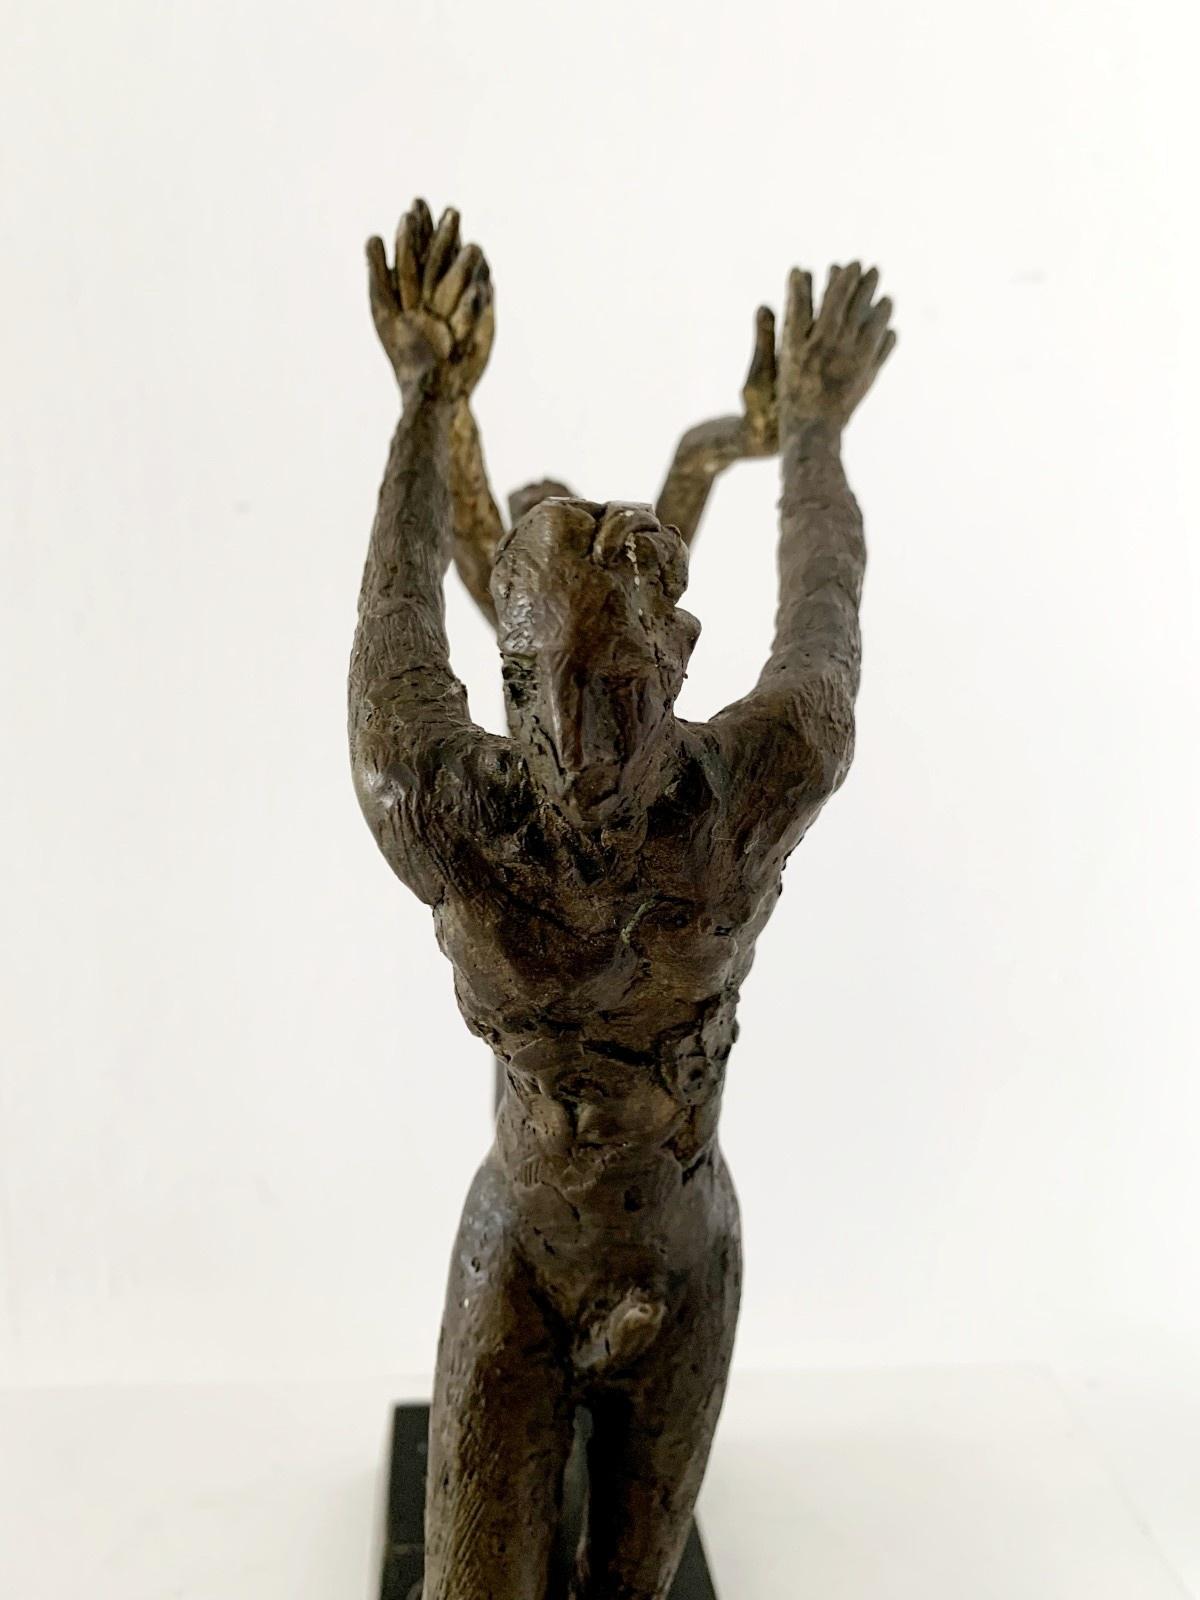 Contemporary bronze figurative sculpture of couple dancing together by Italian artist, professor Giuseppe del Debbio. Sculpture is signed on the base. Couple consists of man and a woman who are holding hands in dynamic, almost acrobatic